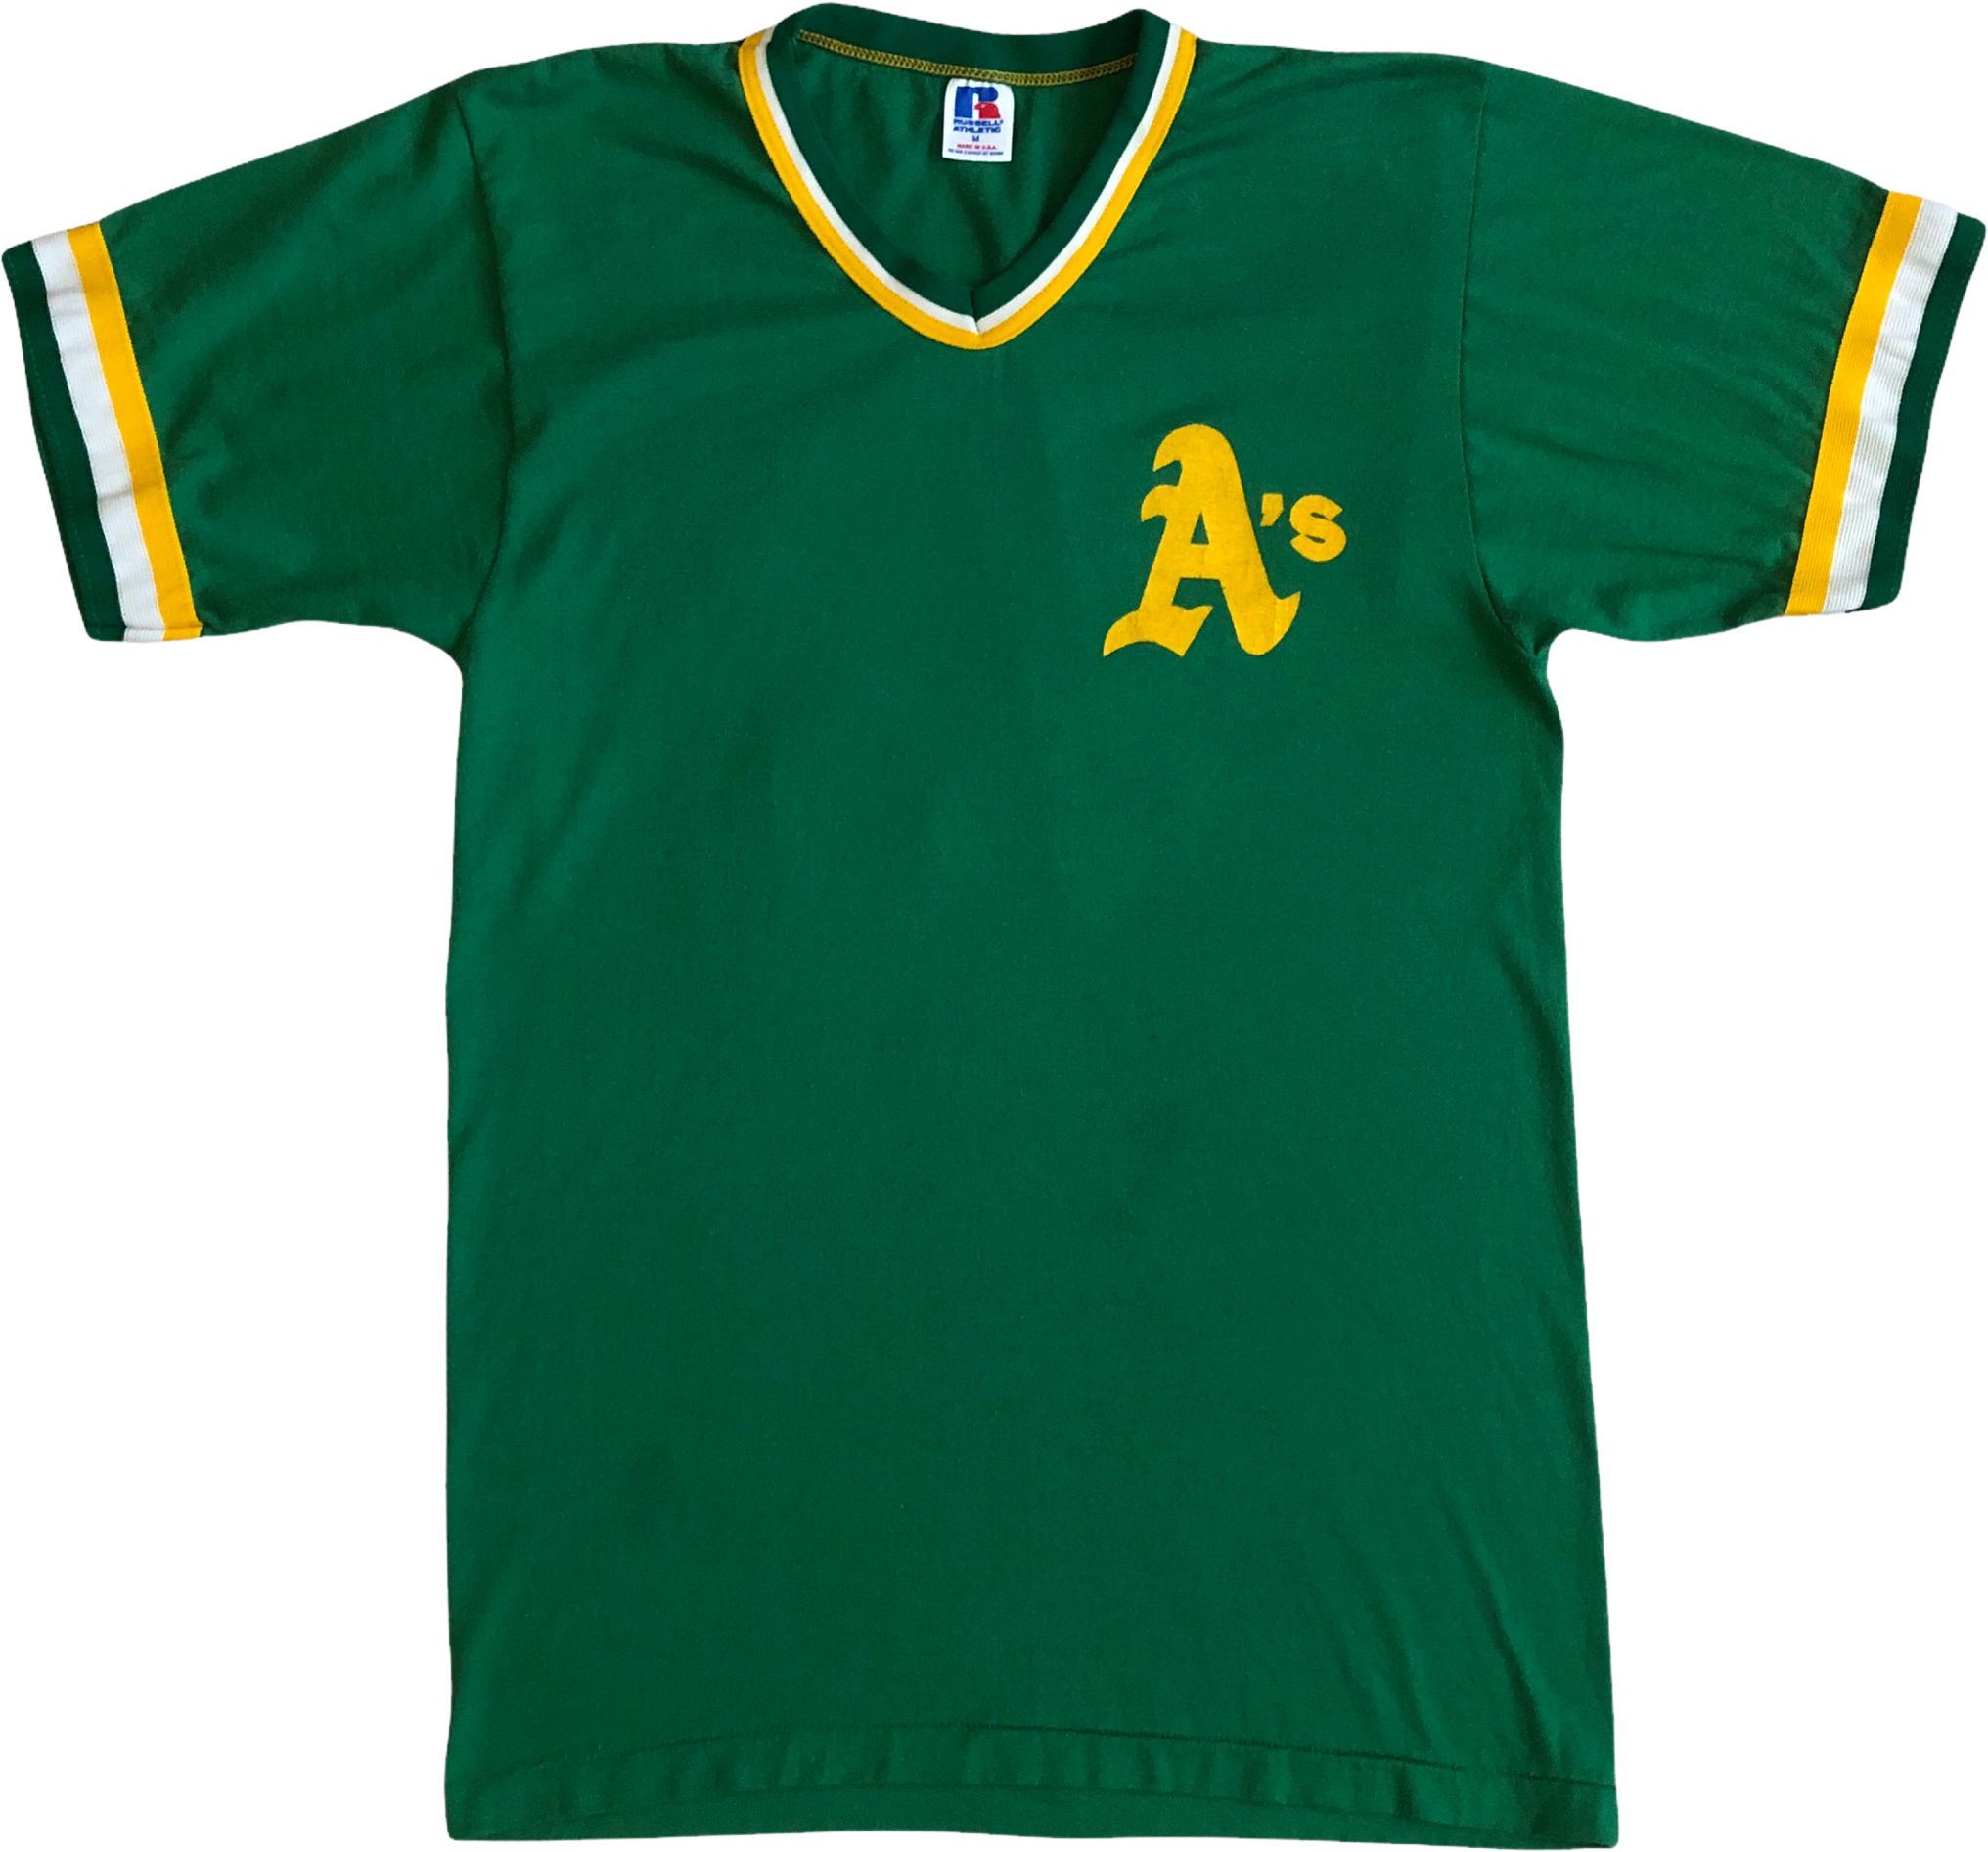 Oakland A's #12 Vintage Russell Athletic Baseball Jersey by